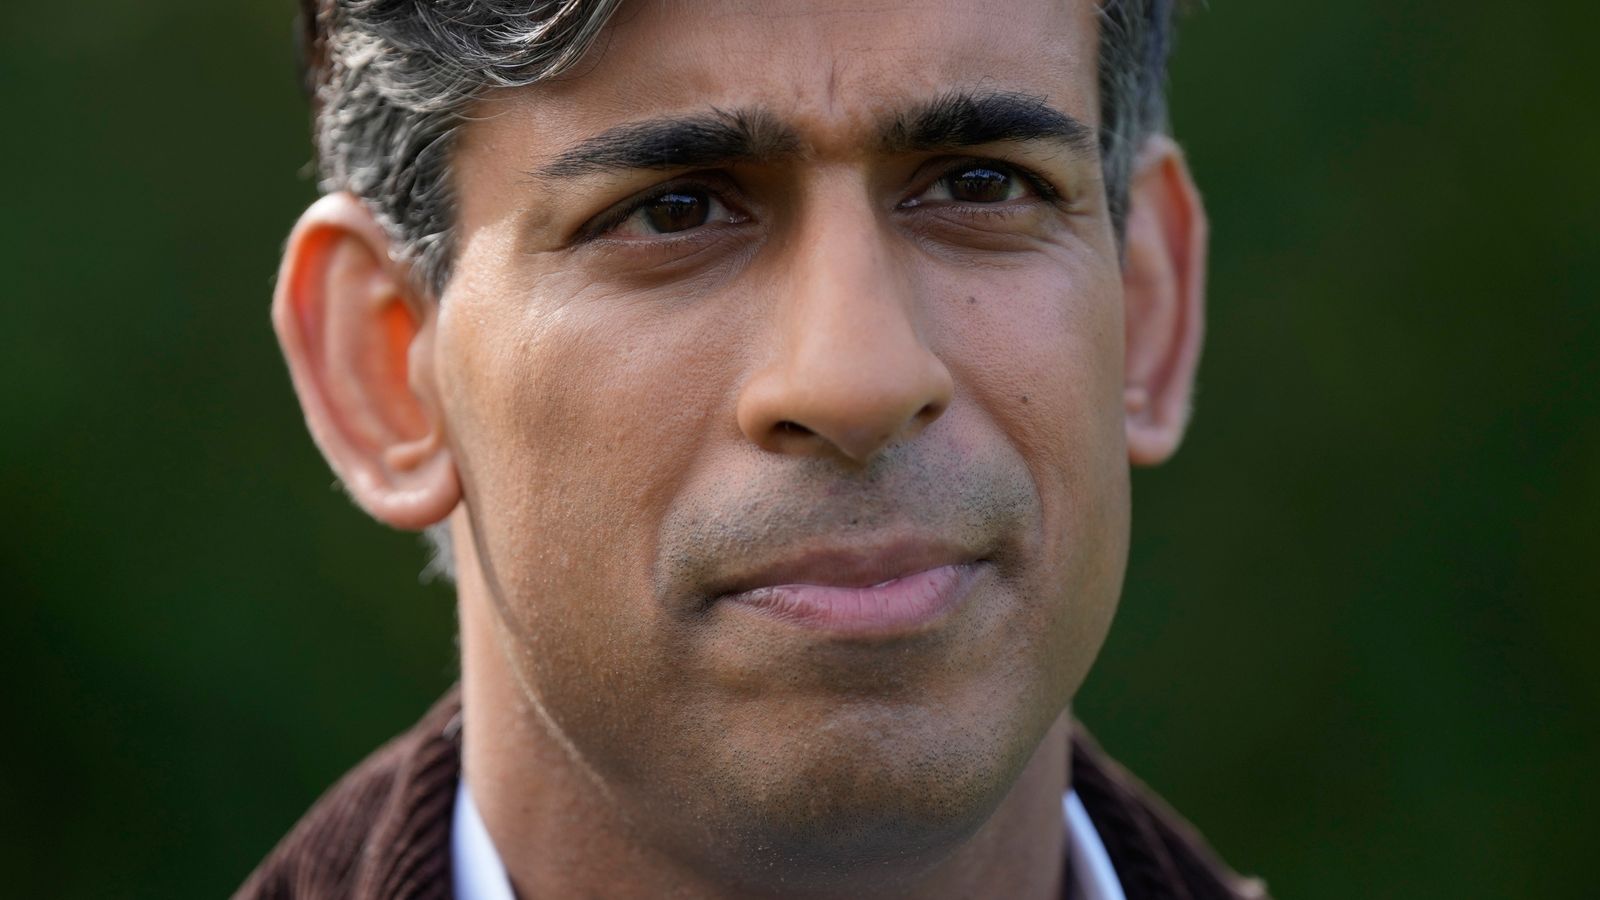 Rishi Sunak to pitch himself as prime minister to 'fundamentally change the country'